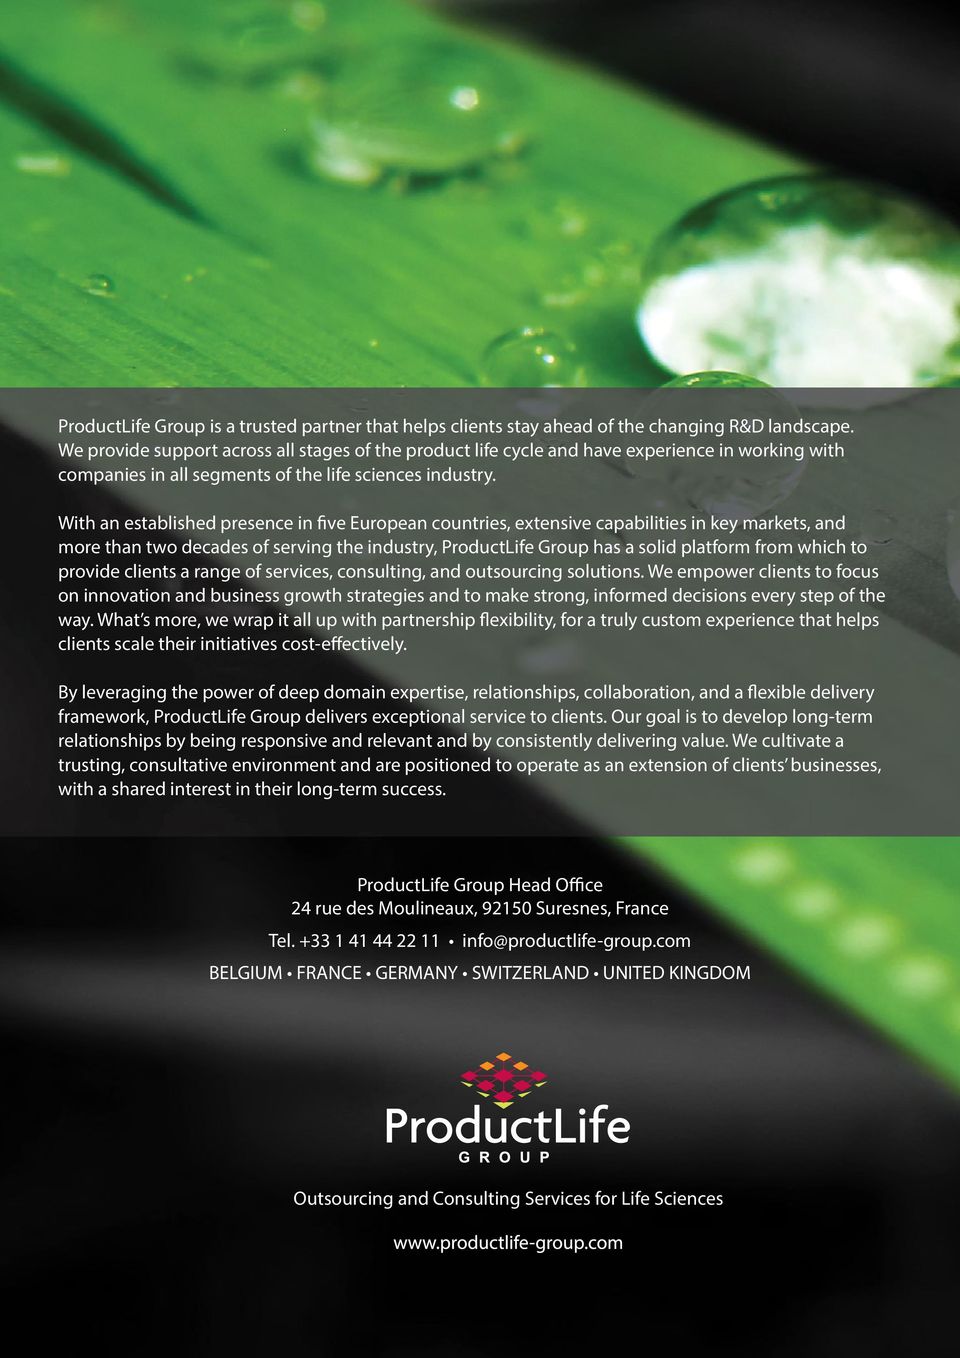 With an established presence in five European countries, extensive capabilities in key markets, and more than two decades of serving the industry, ProductLife Group has a solid platform from which to